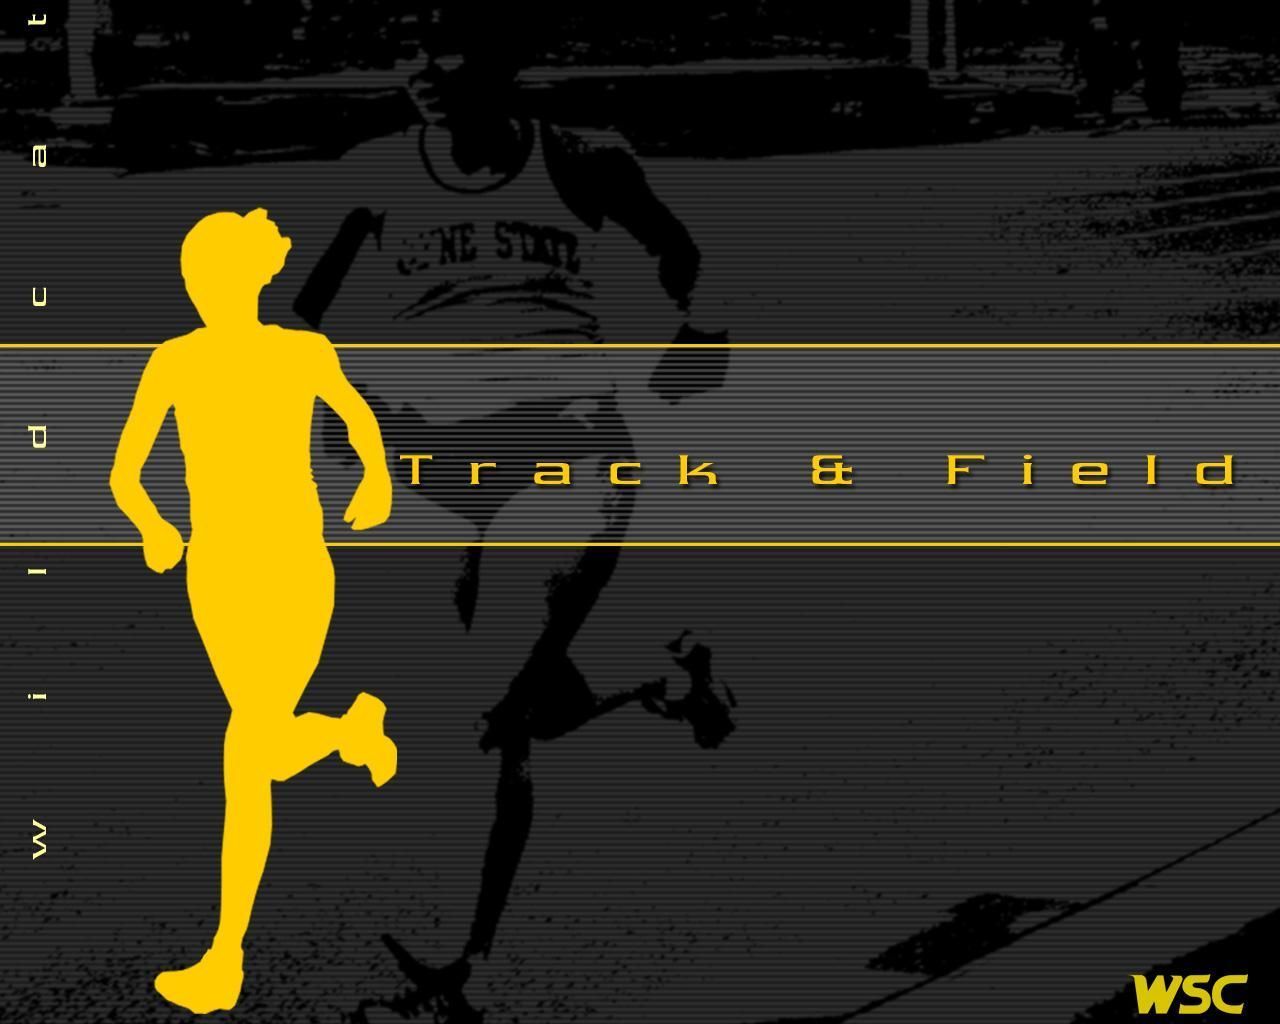 Track And Field Wallpapers Wallpaper 1 13 Of 13 | HD Wallpapers Range